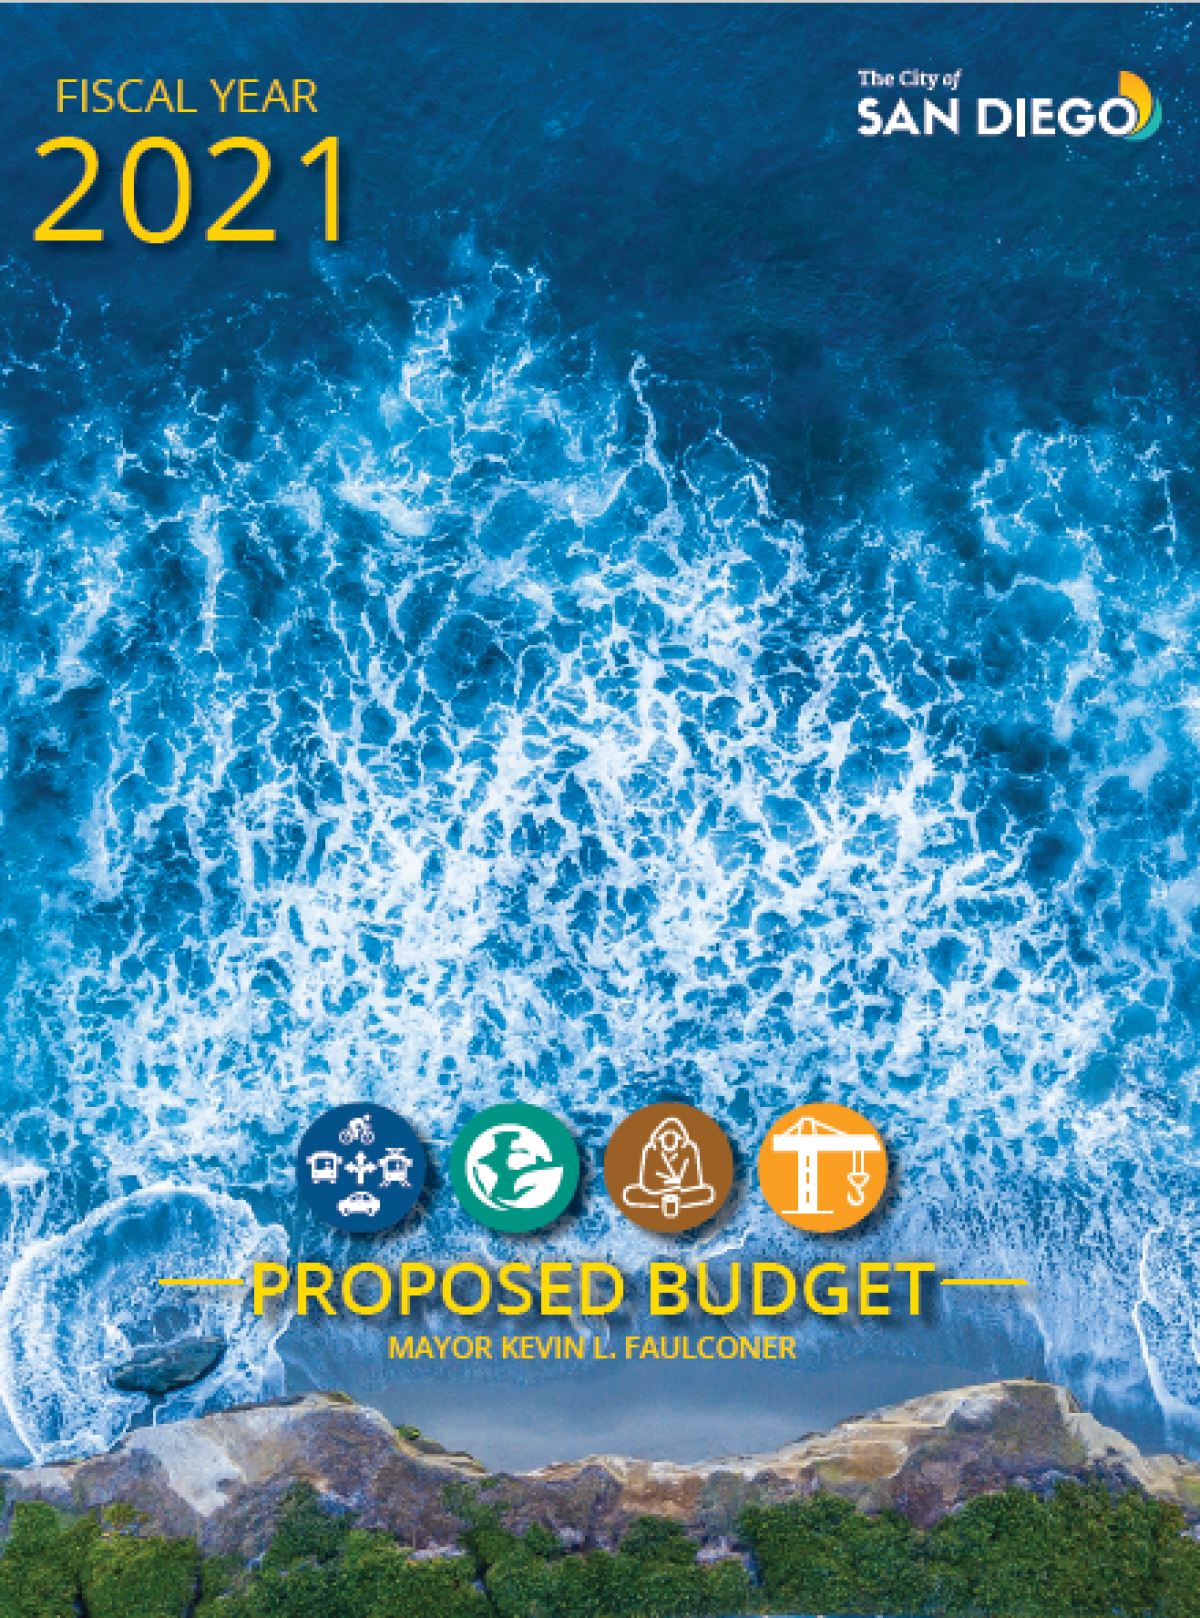 The cover image for San Diego's proposed fiscal 2021 budget.